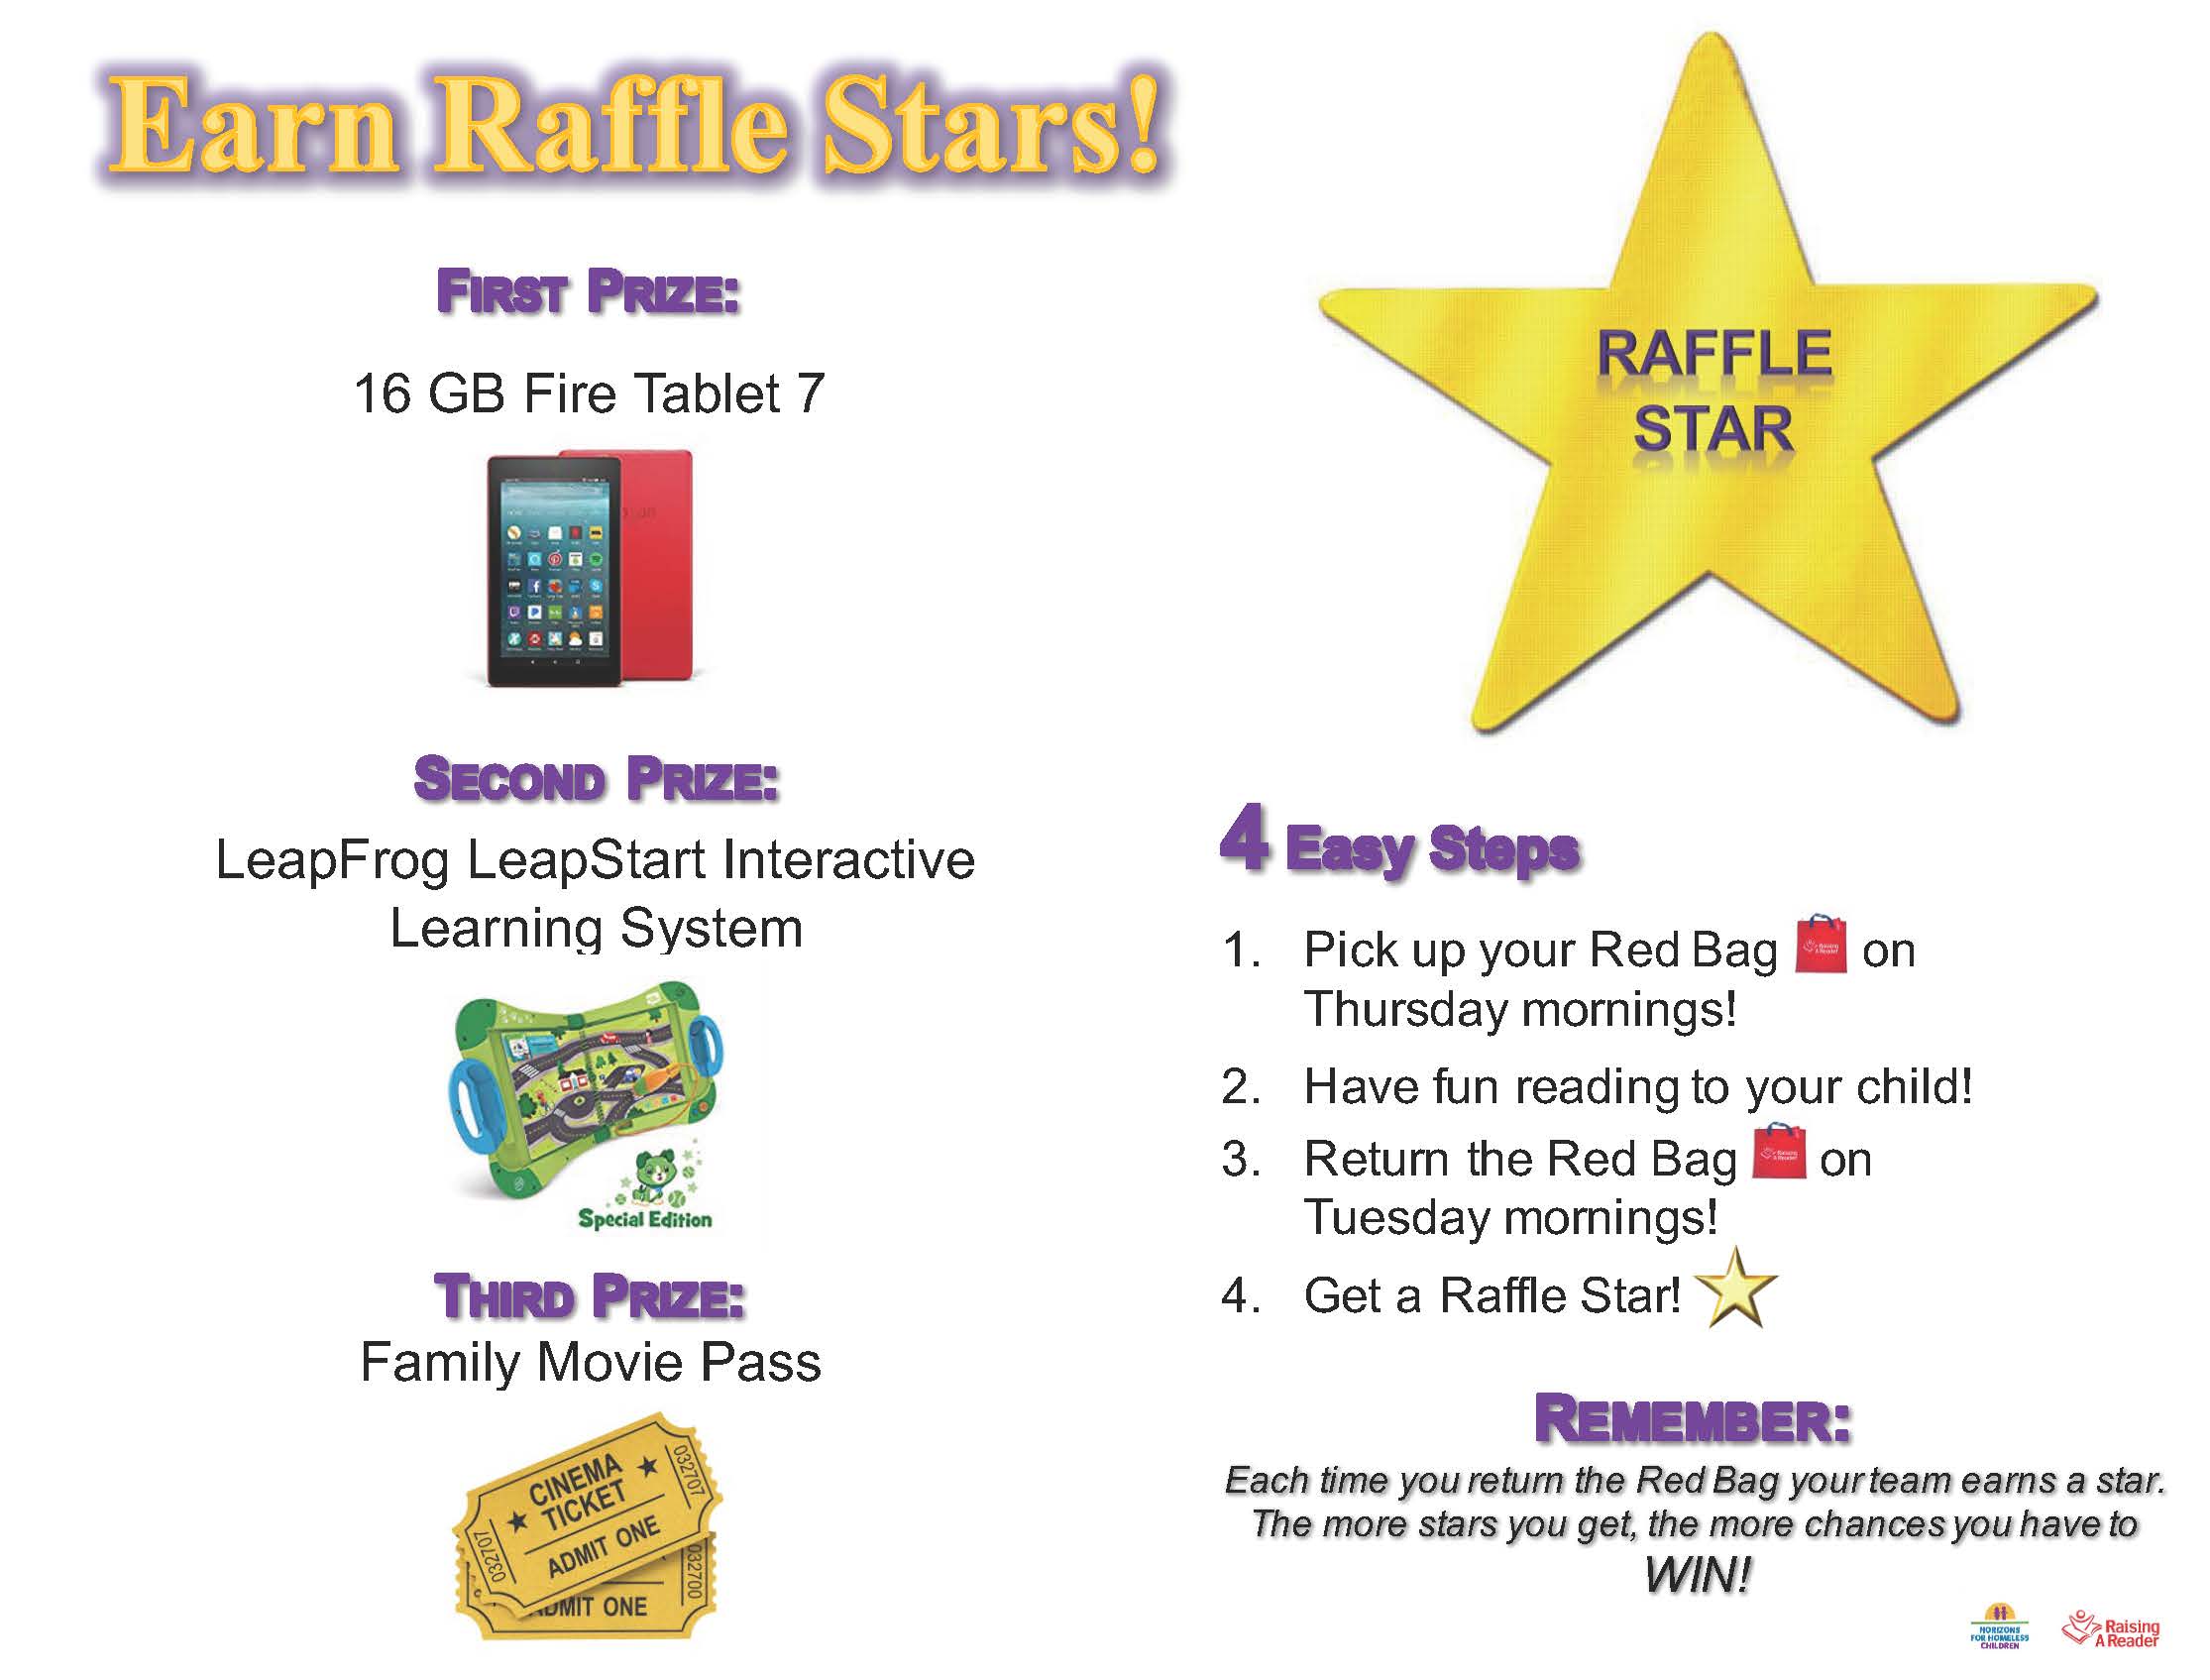 Earn raffle stars and prizes by returning books on time